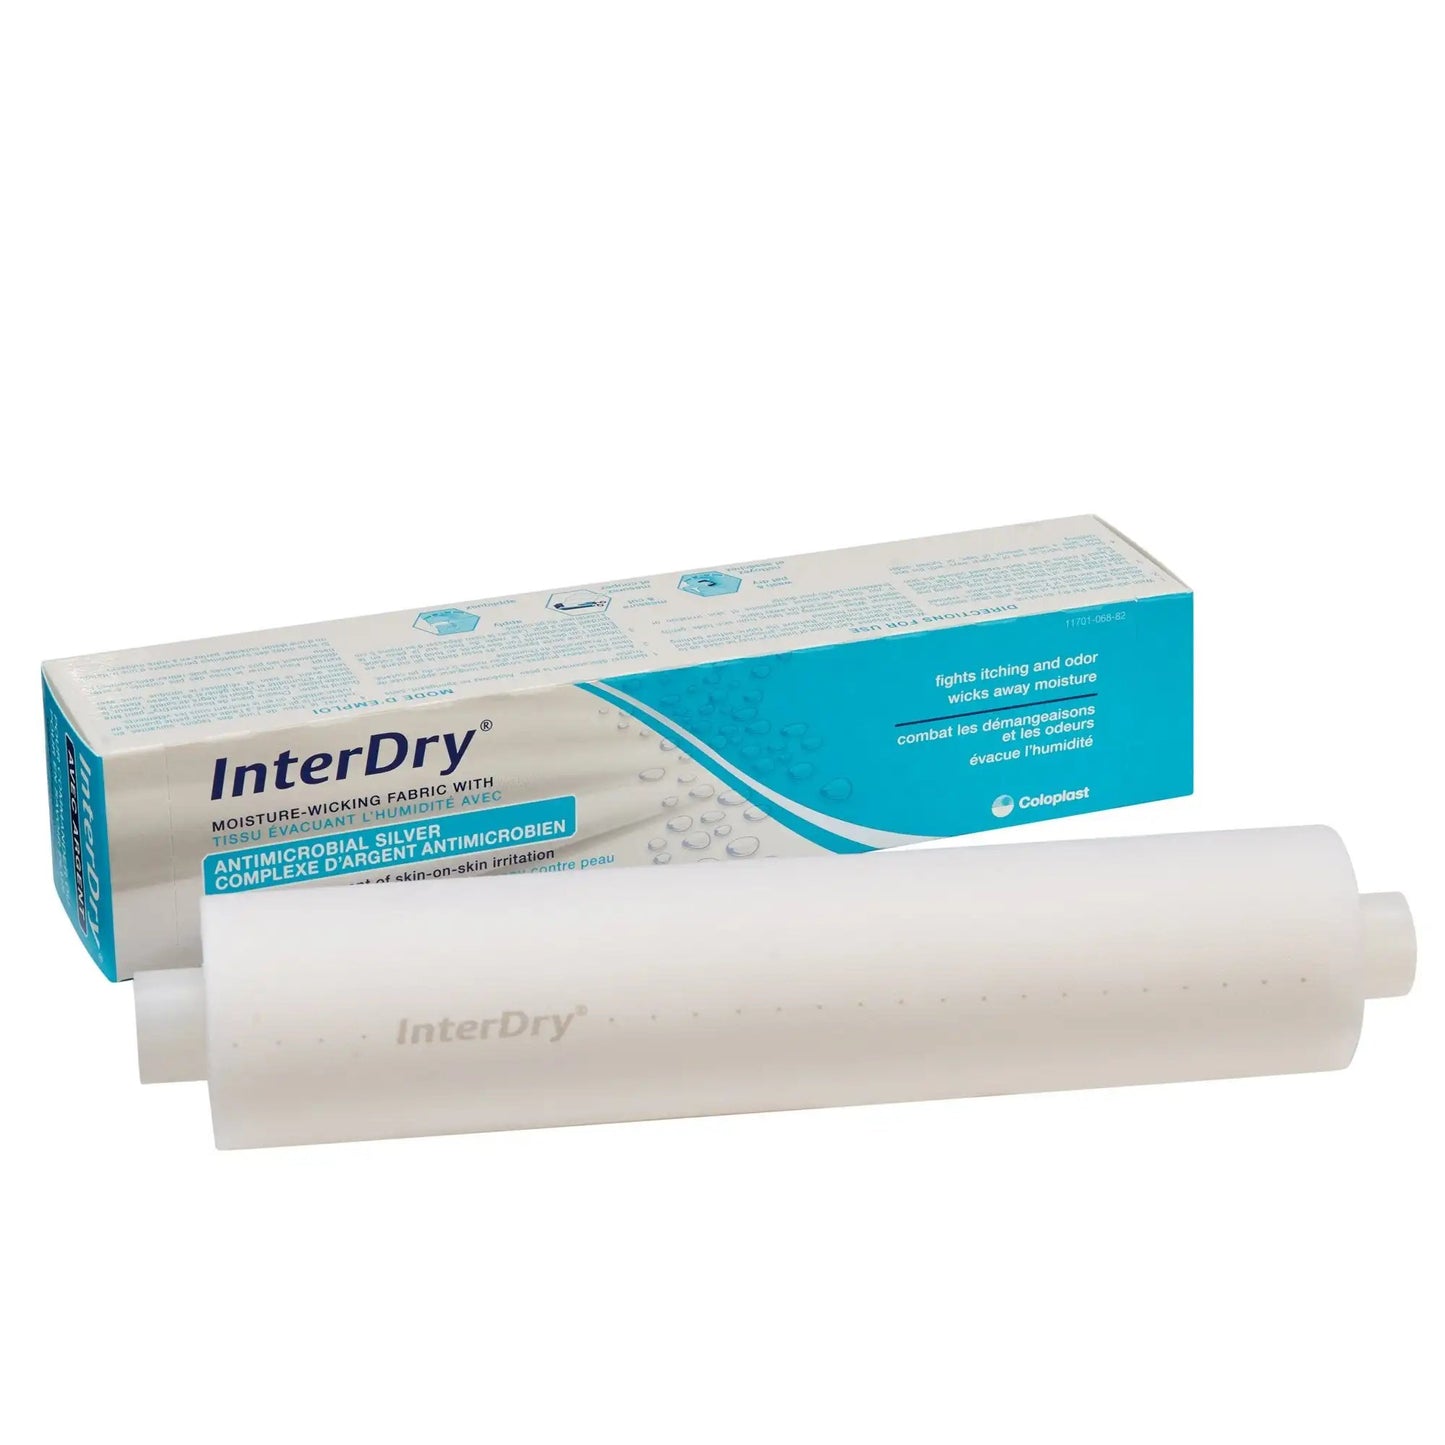 InterDry Skinfold Management Dressing with Silver, 10 Inch x 4 Yard-Each